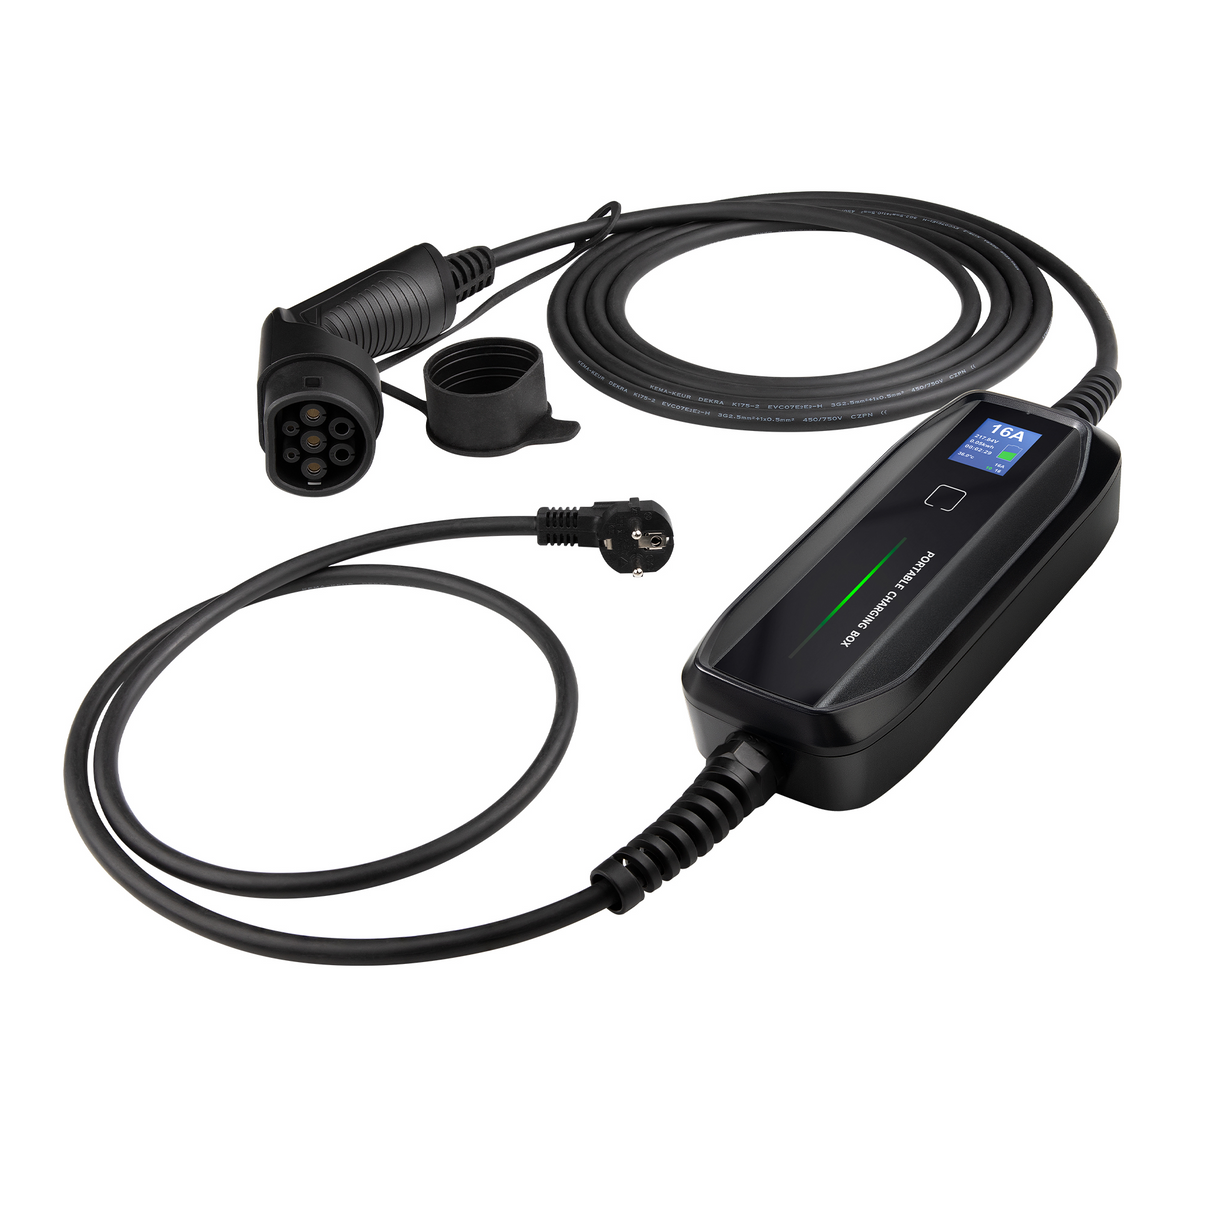 Mobile charger Byd Seal U - Besen with LCD - Type 2 to Schuko